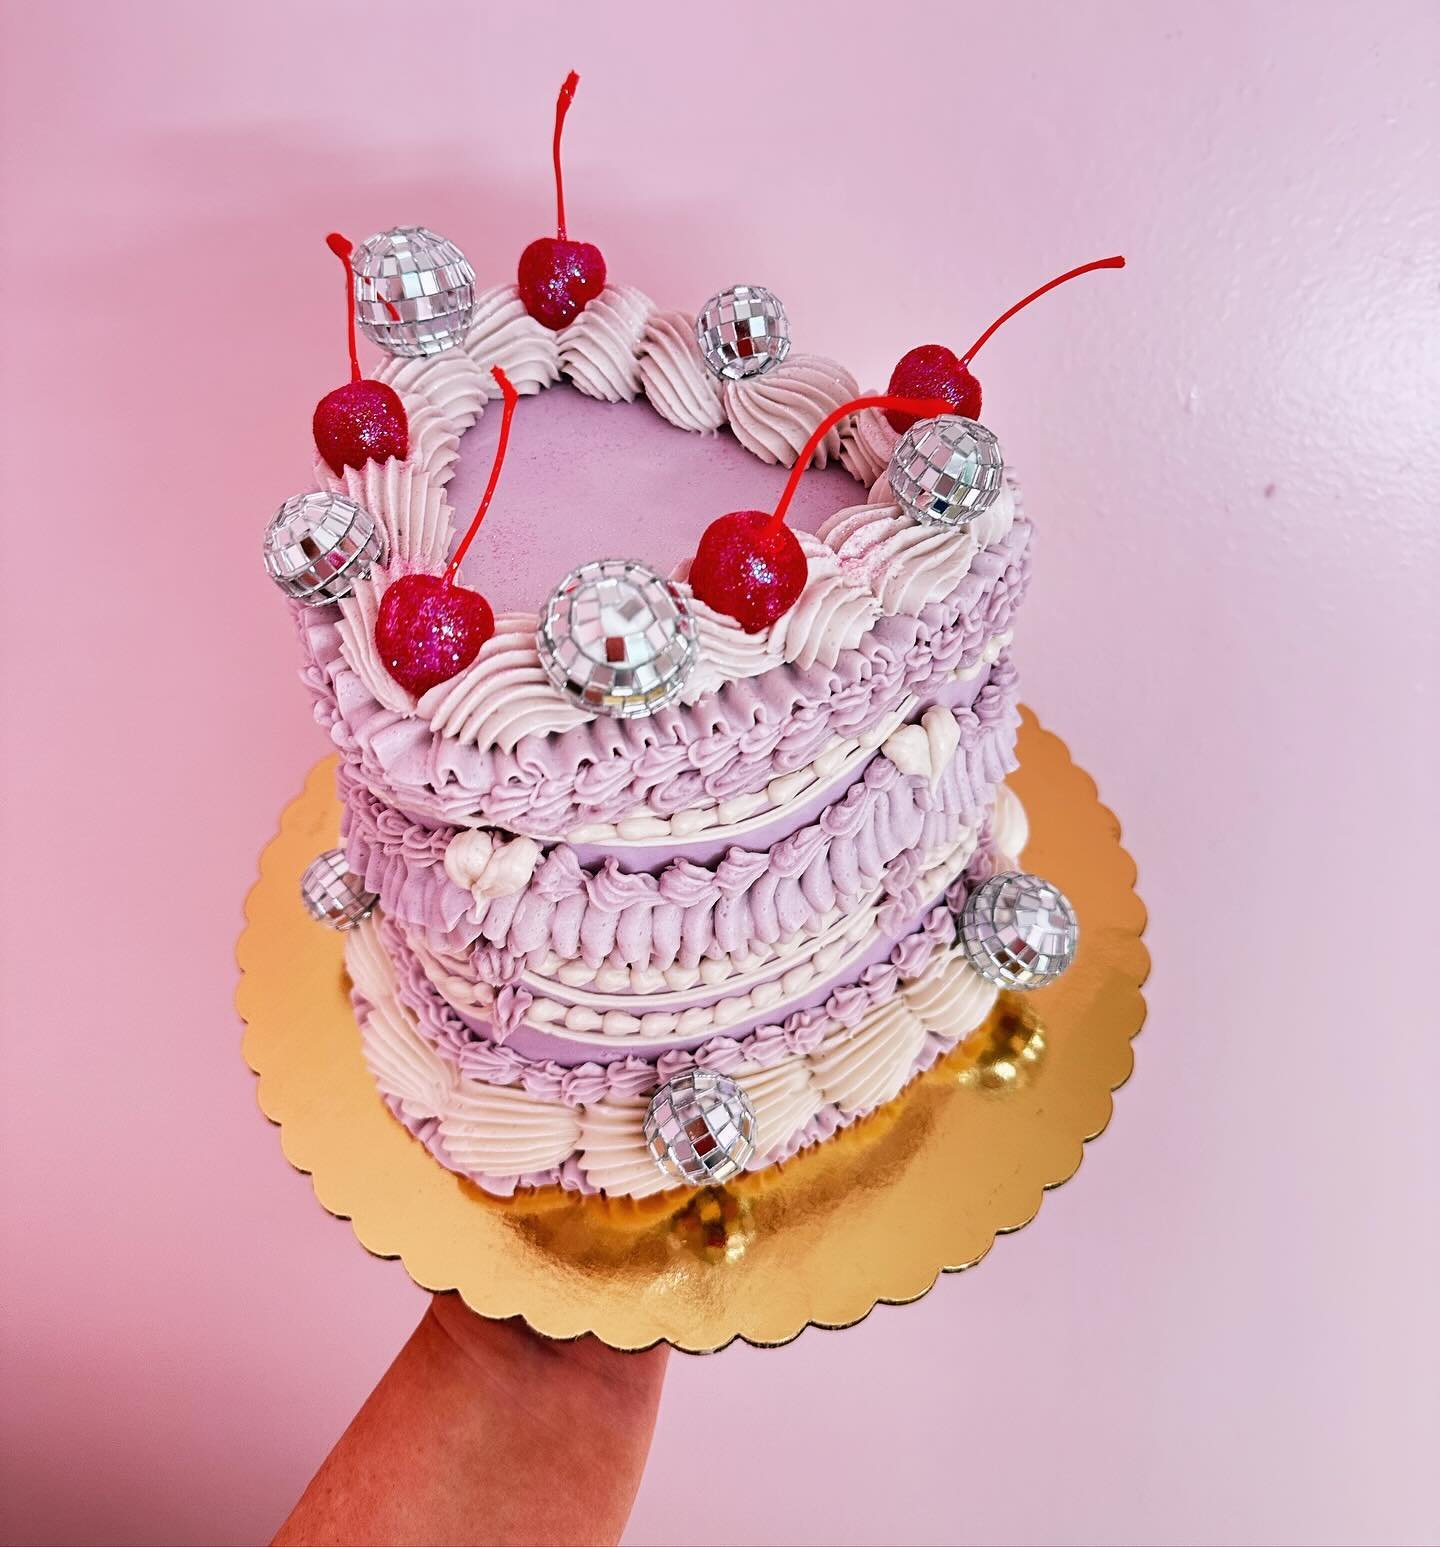 A lavender colored frilly cake with glitter cherries and disco balls! 💜🍒🪩